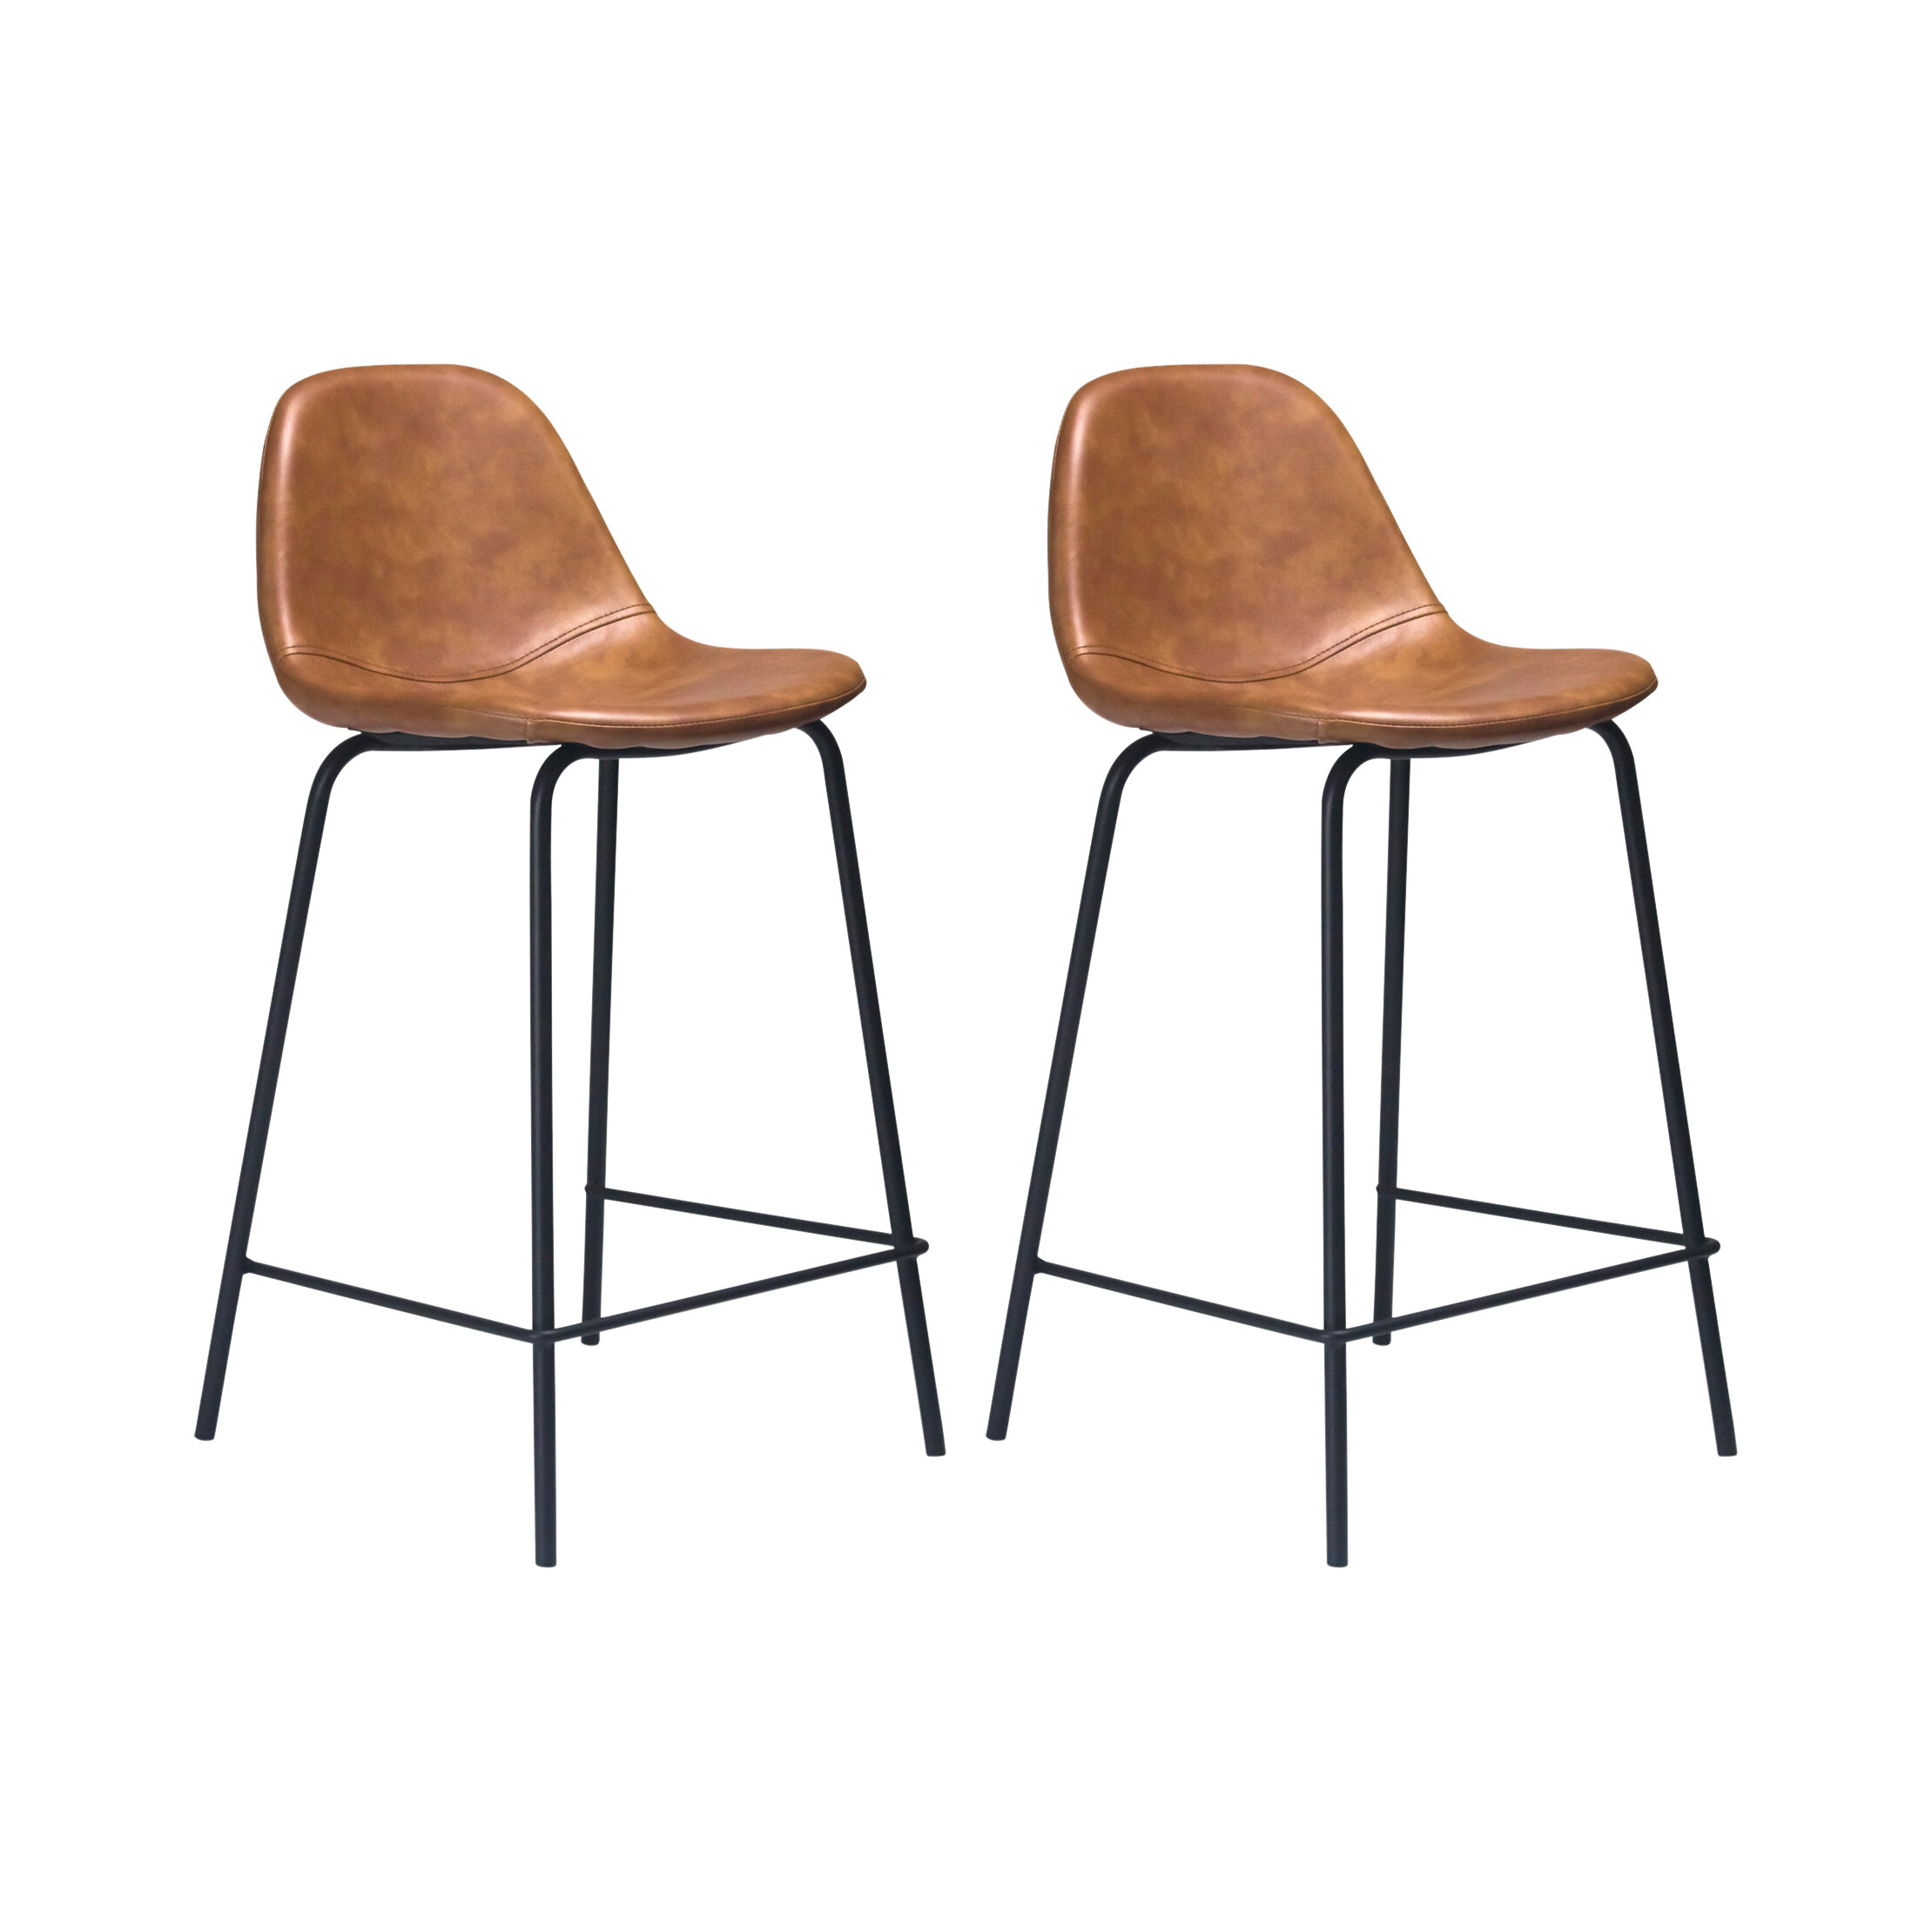 faux leather counter height bar stools